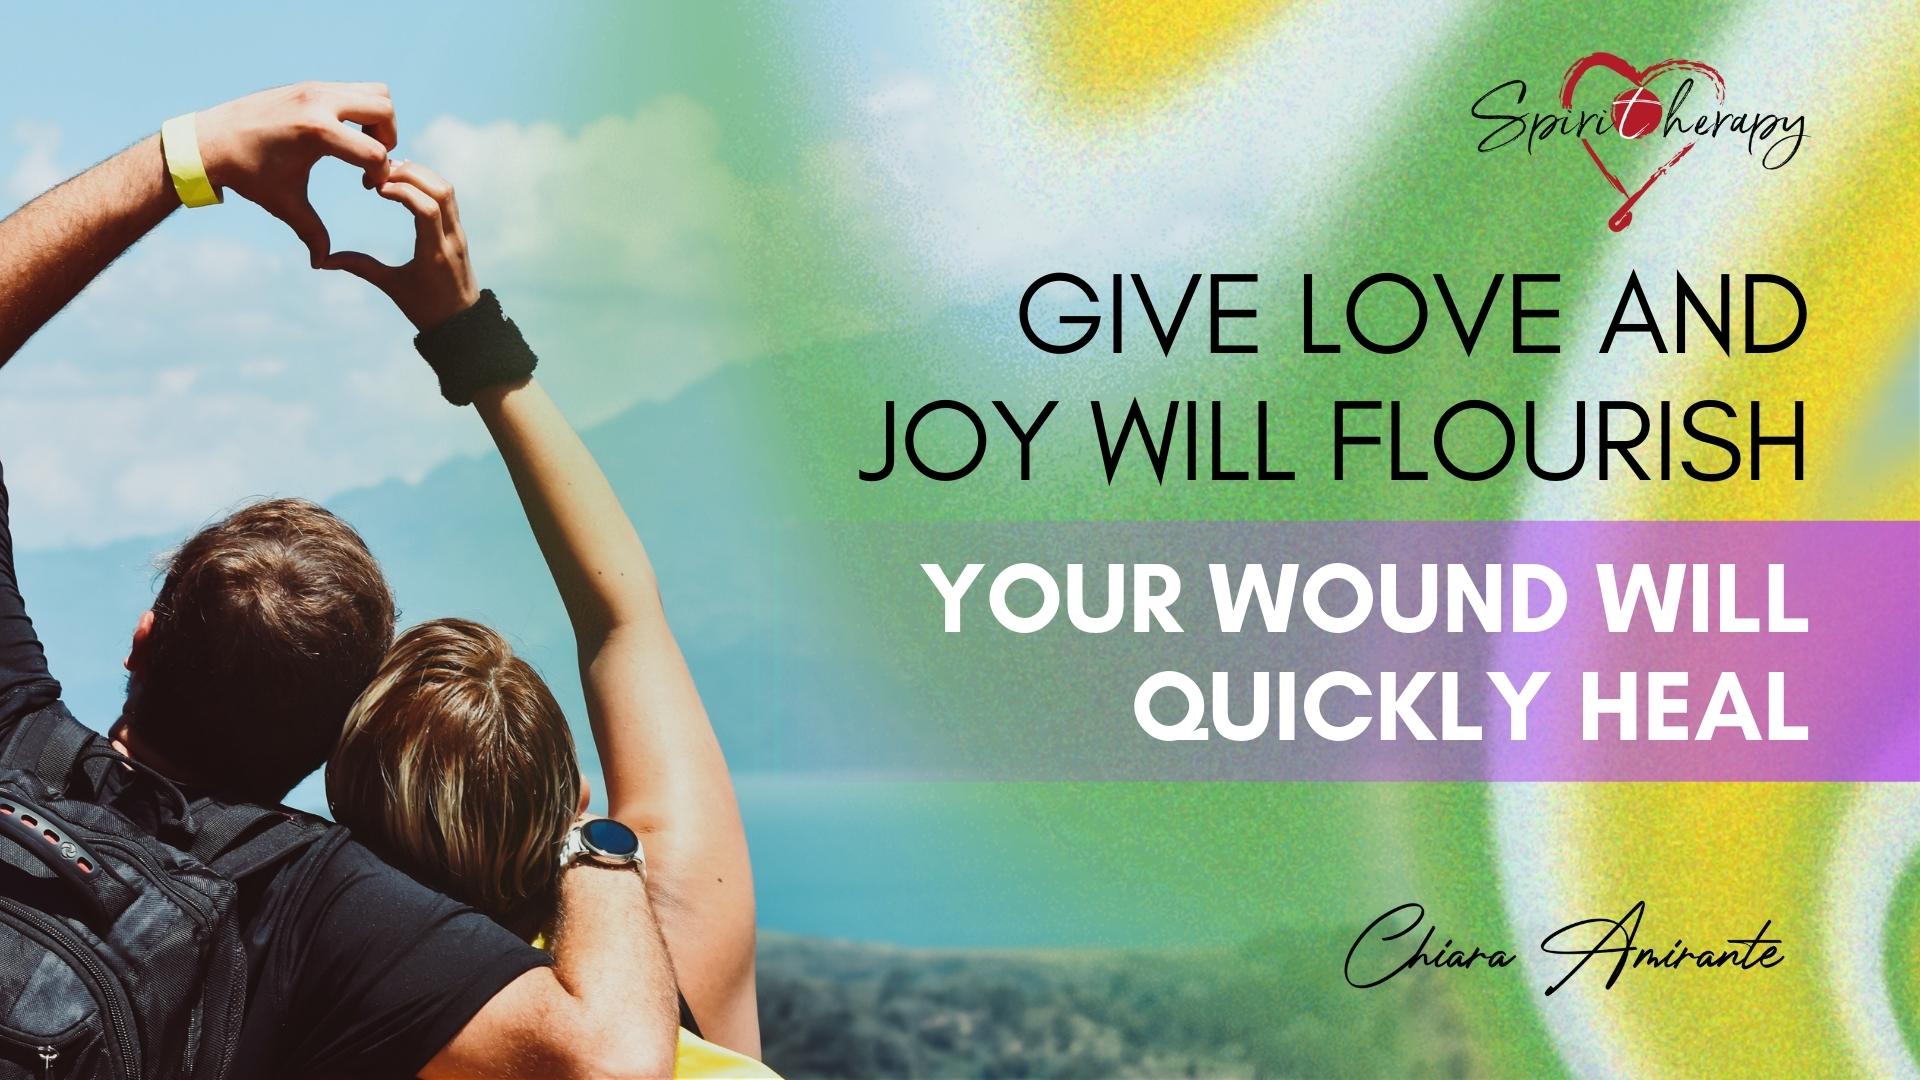 GIVE LOVE AND JOY WILL FLOURISH - Your wound will quickly heal - Chiara Amirante